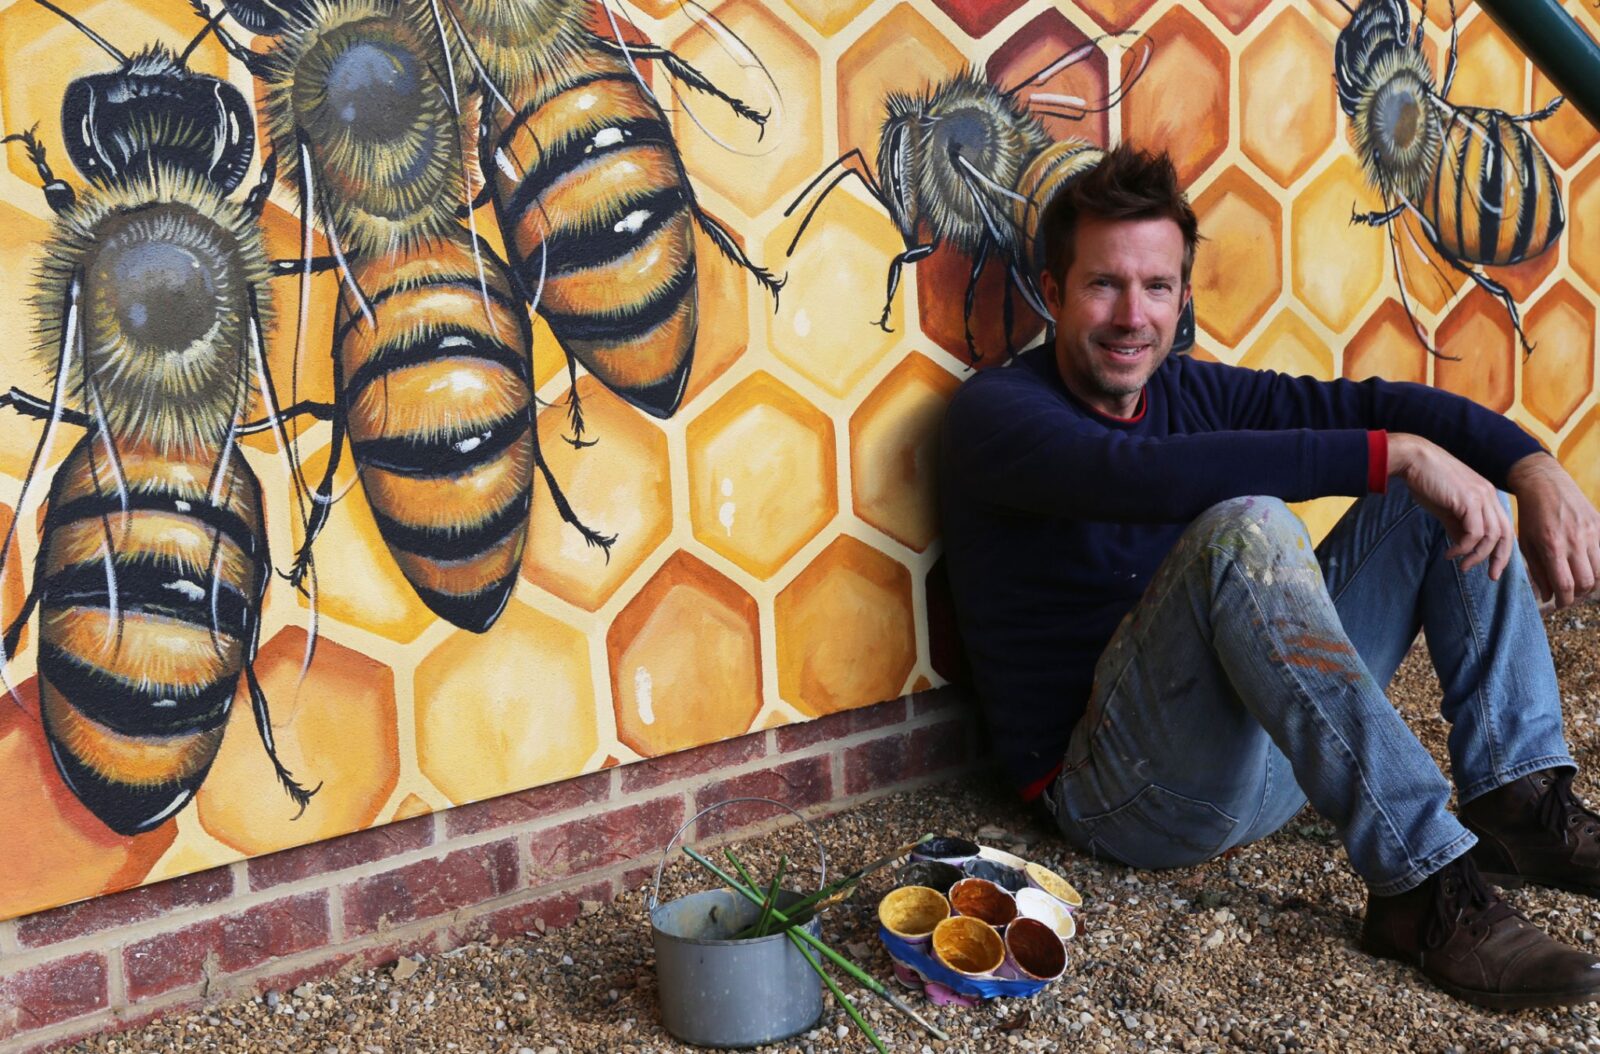 Town’s abuzz: International artist comes to Rifle to paint bee mural